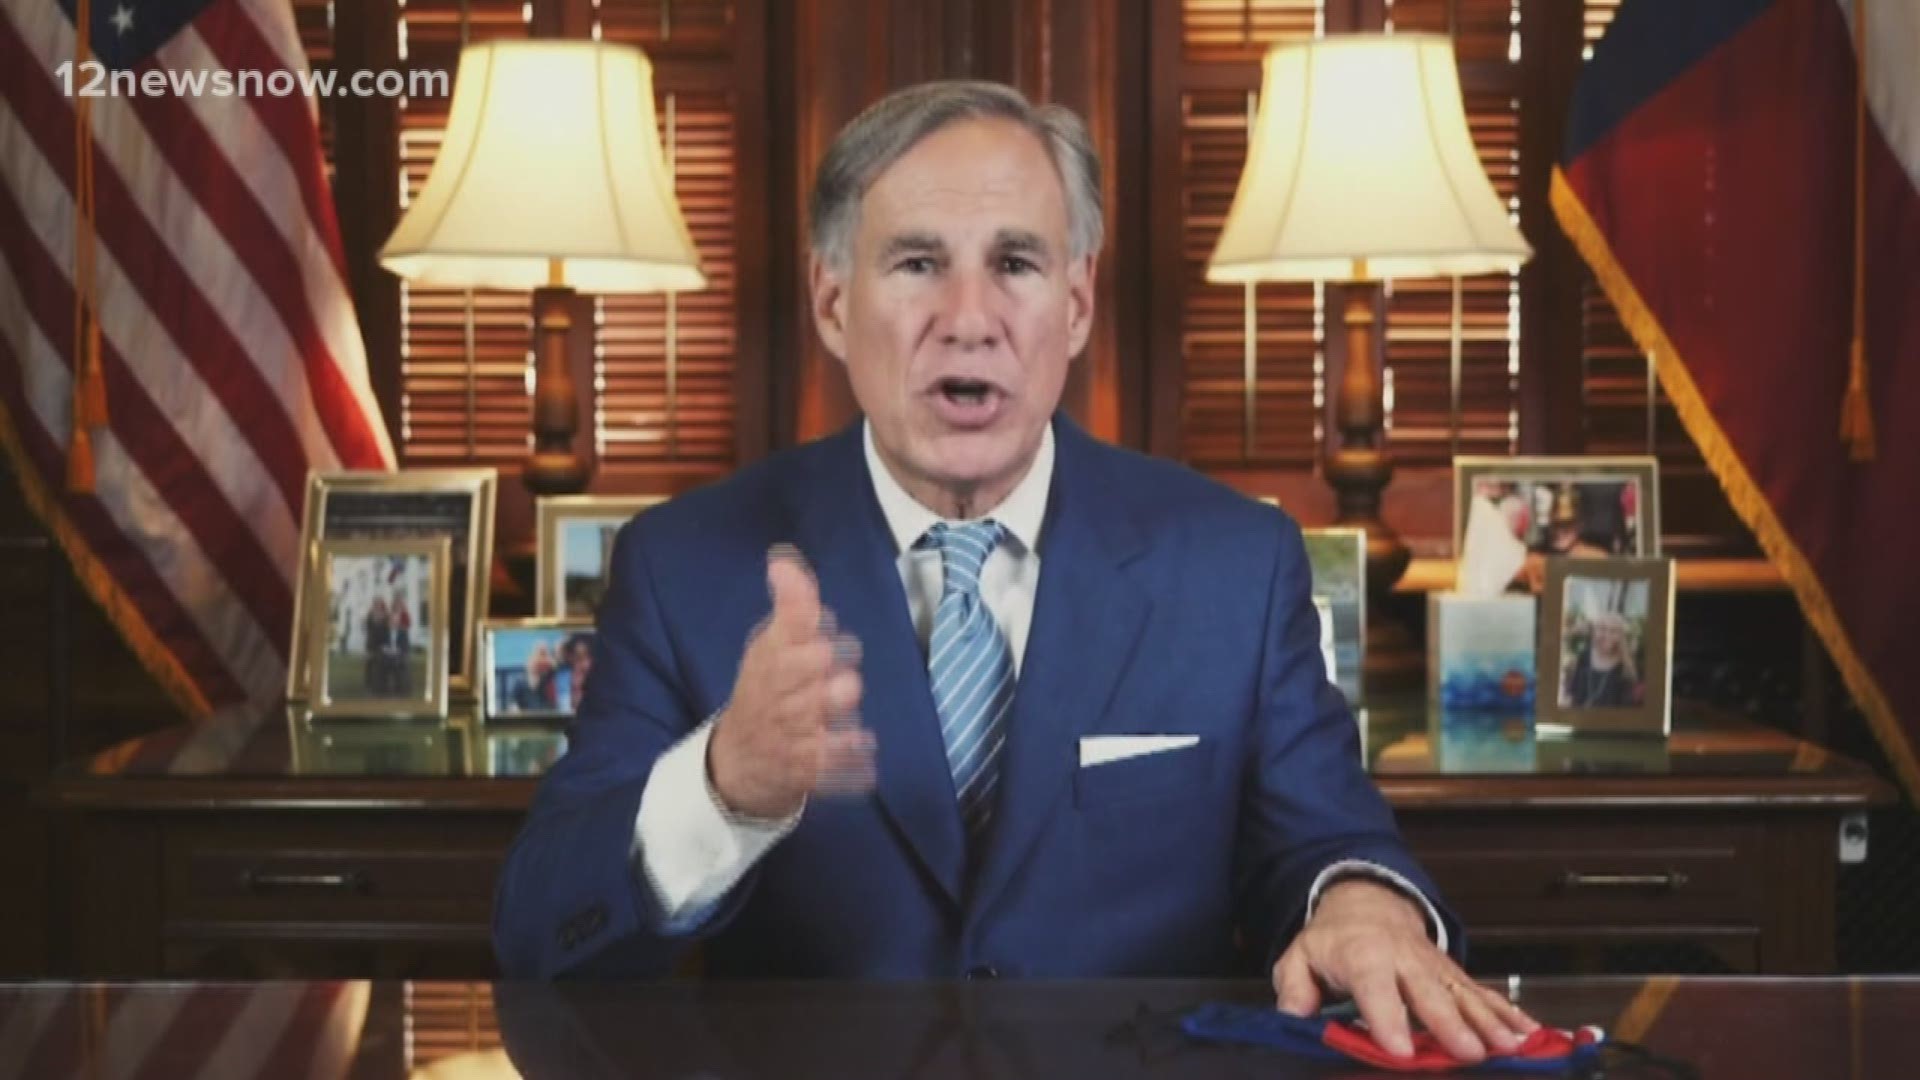 At least 8 other Texas counties have voted to censure Gov. Abbott